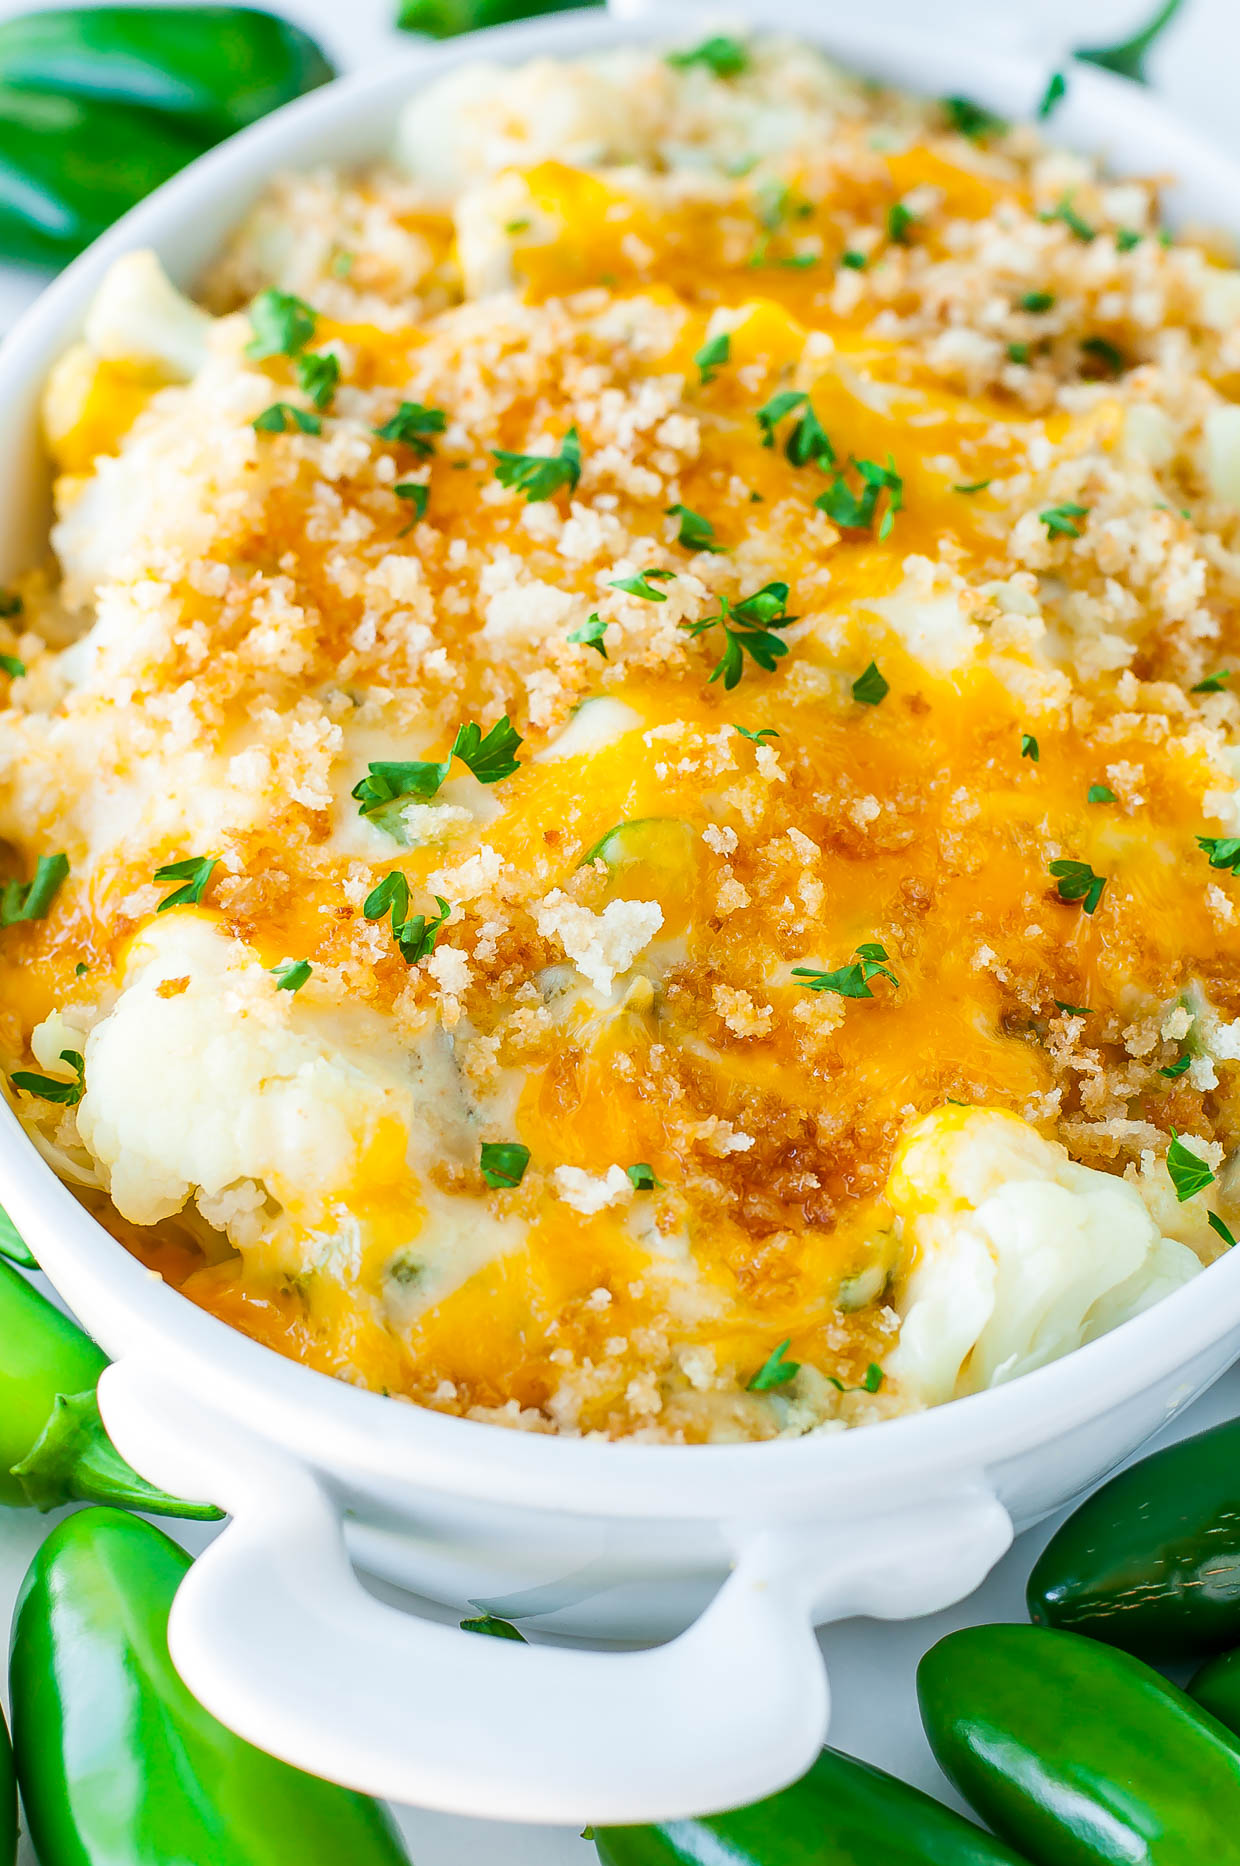 Totally unconventional and wildly delicious, this Creamy Cauliflower Jalapeño Popper Casserole is an easy cheesy veggie gratin with a kick!